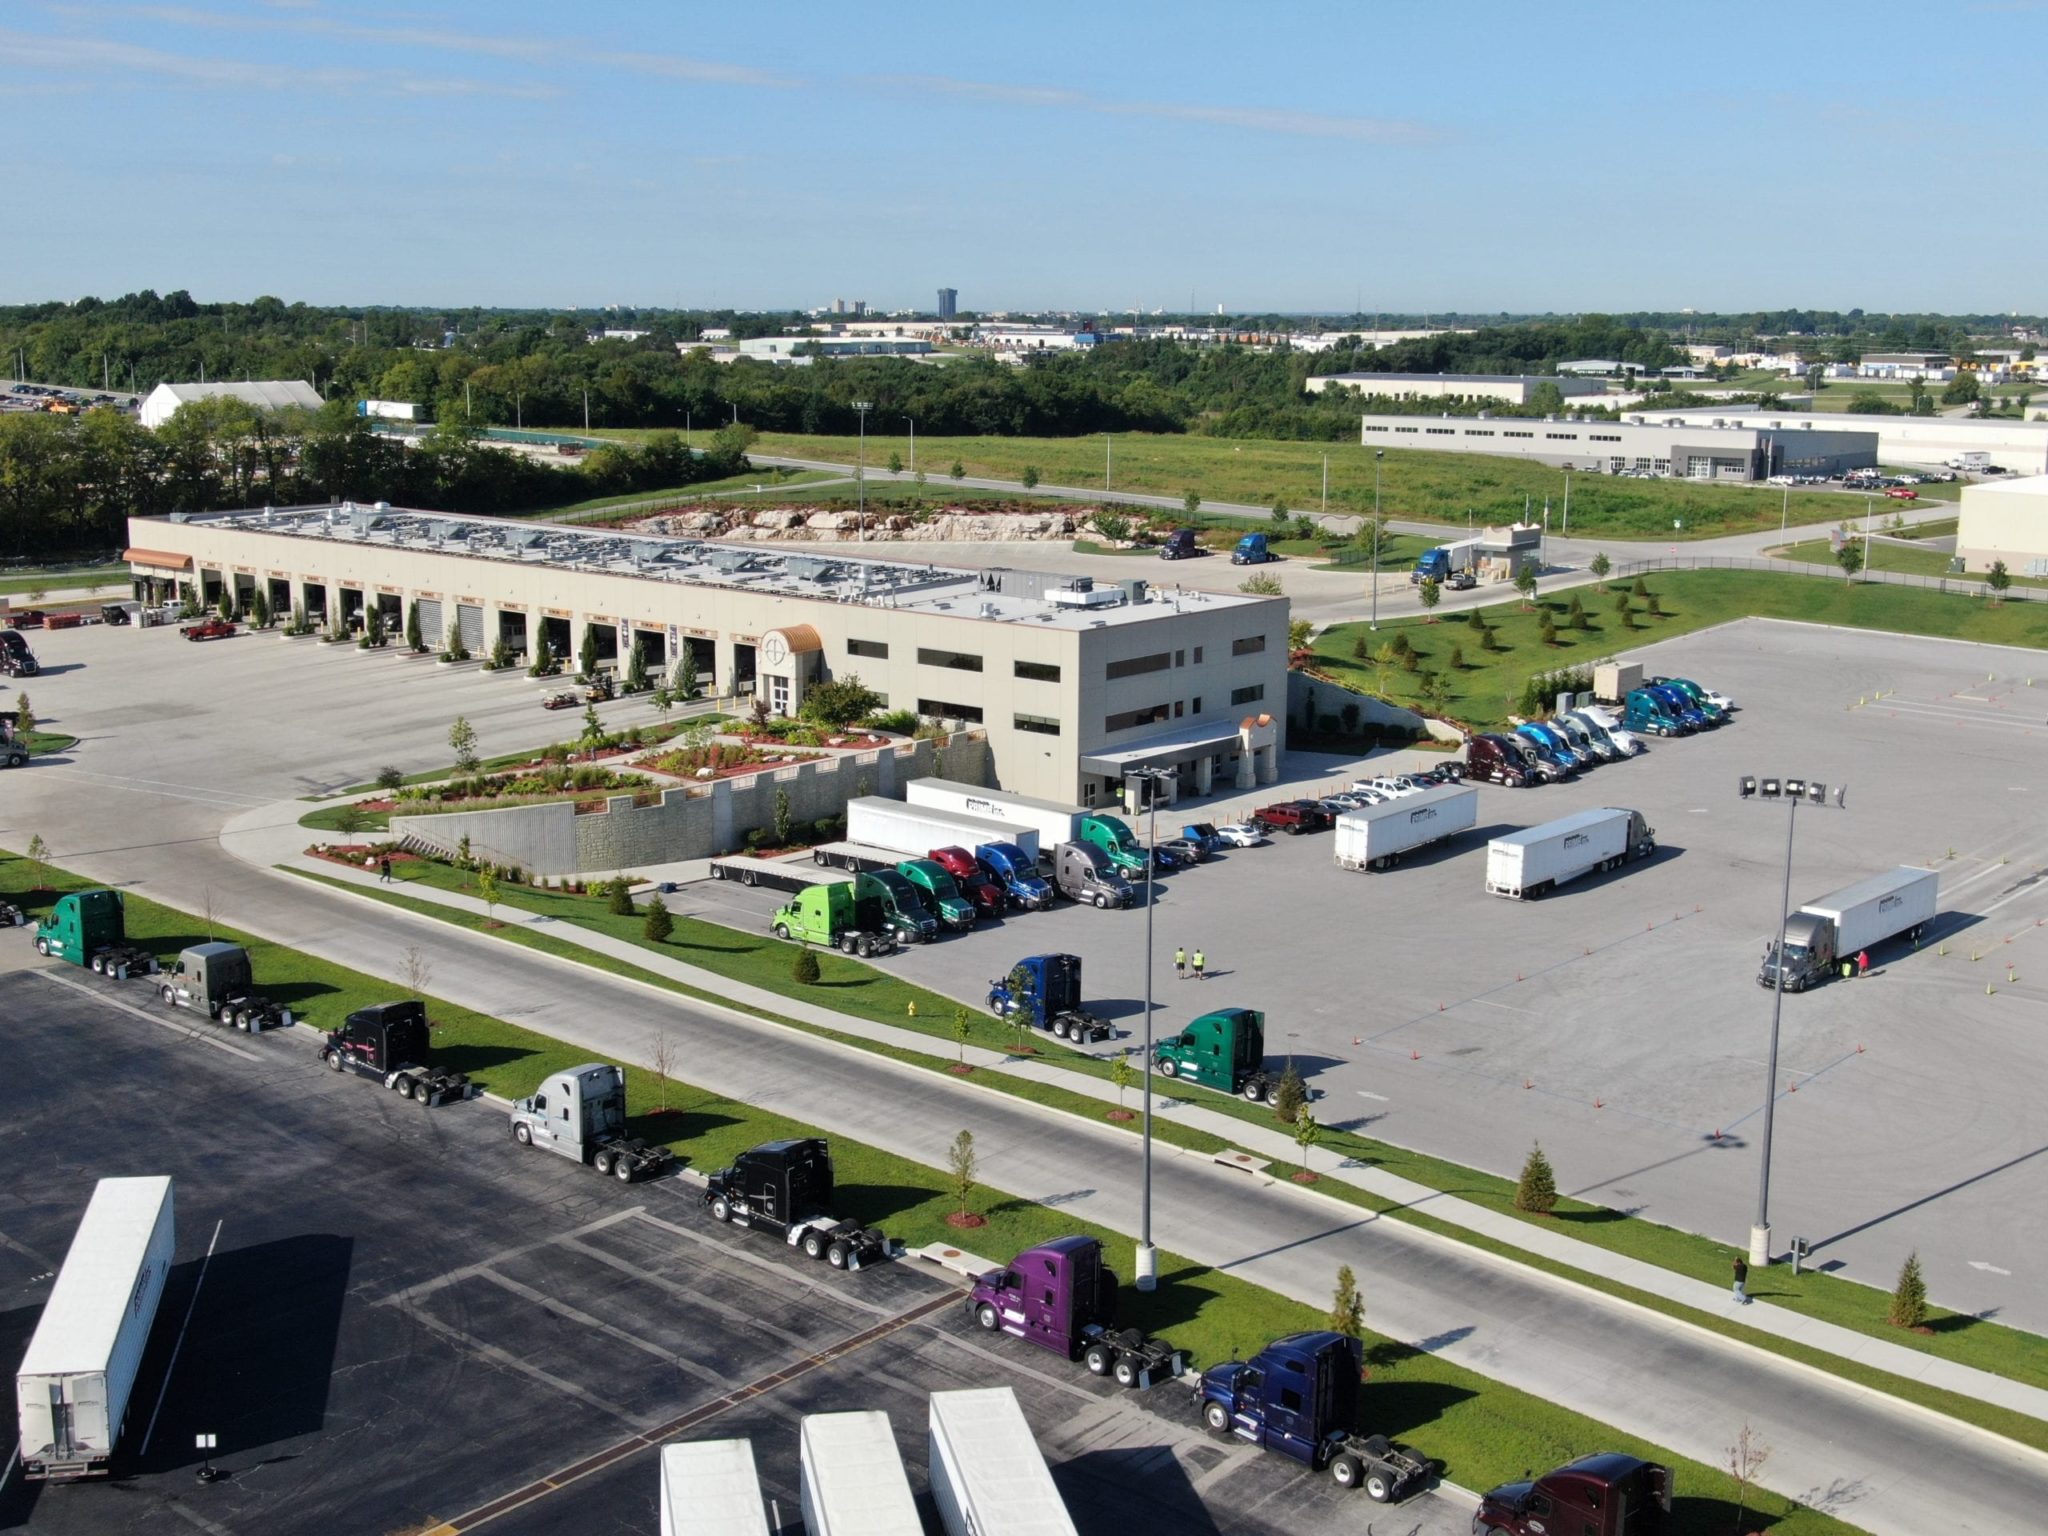 Aerial view of Prime's Springfield terminal, where you can take the Class A CDL exam.